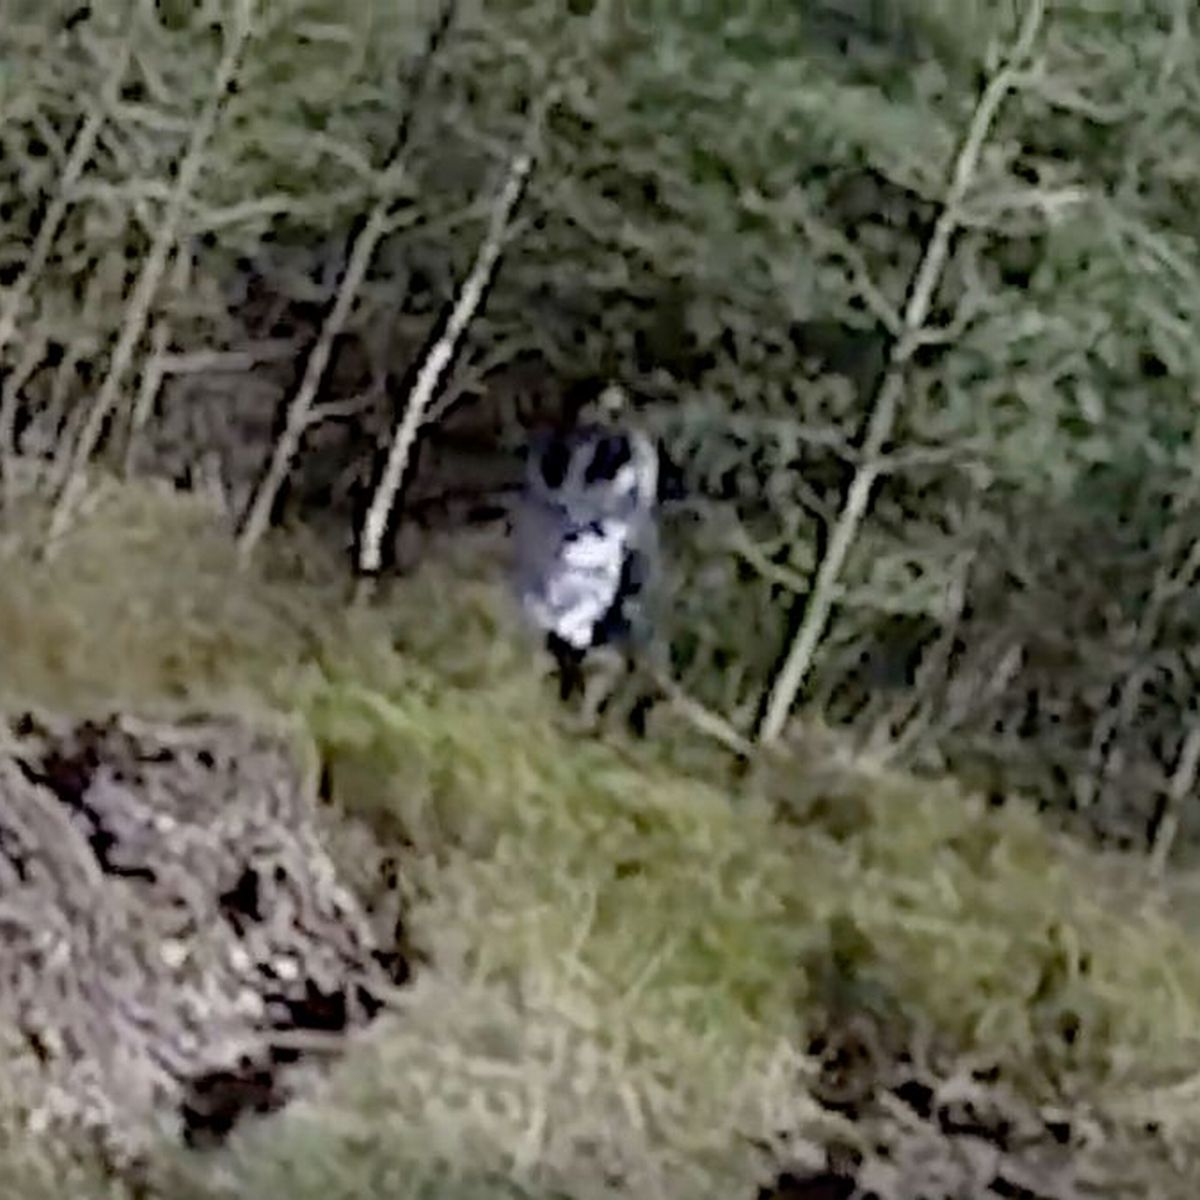 Mysterious 'Black-Eyed Girl' Spotted Running In Cannock Chase Forest - Spooky Drone Footage